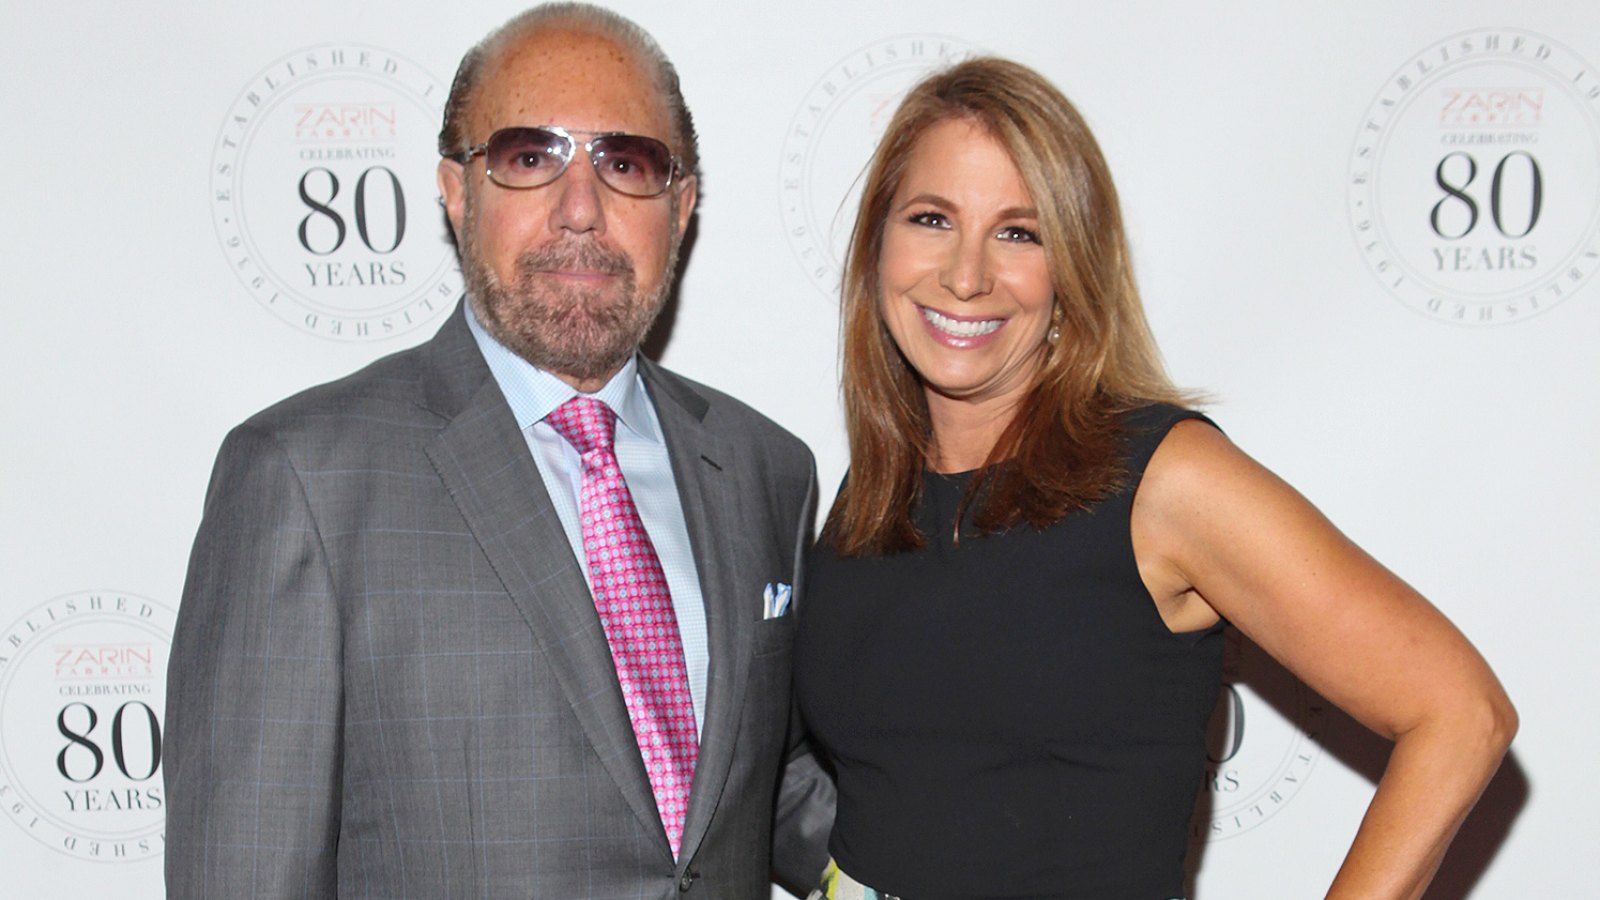 Bobby Zarin, Jill Zarin, Real Housewives of New York, Support